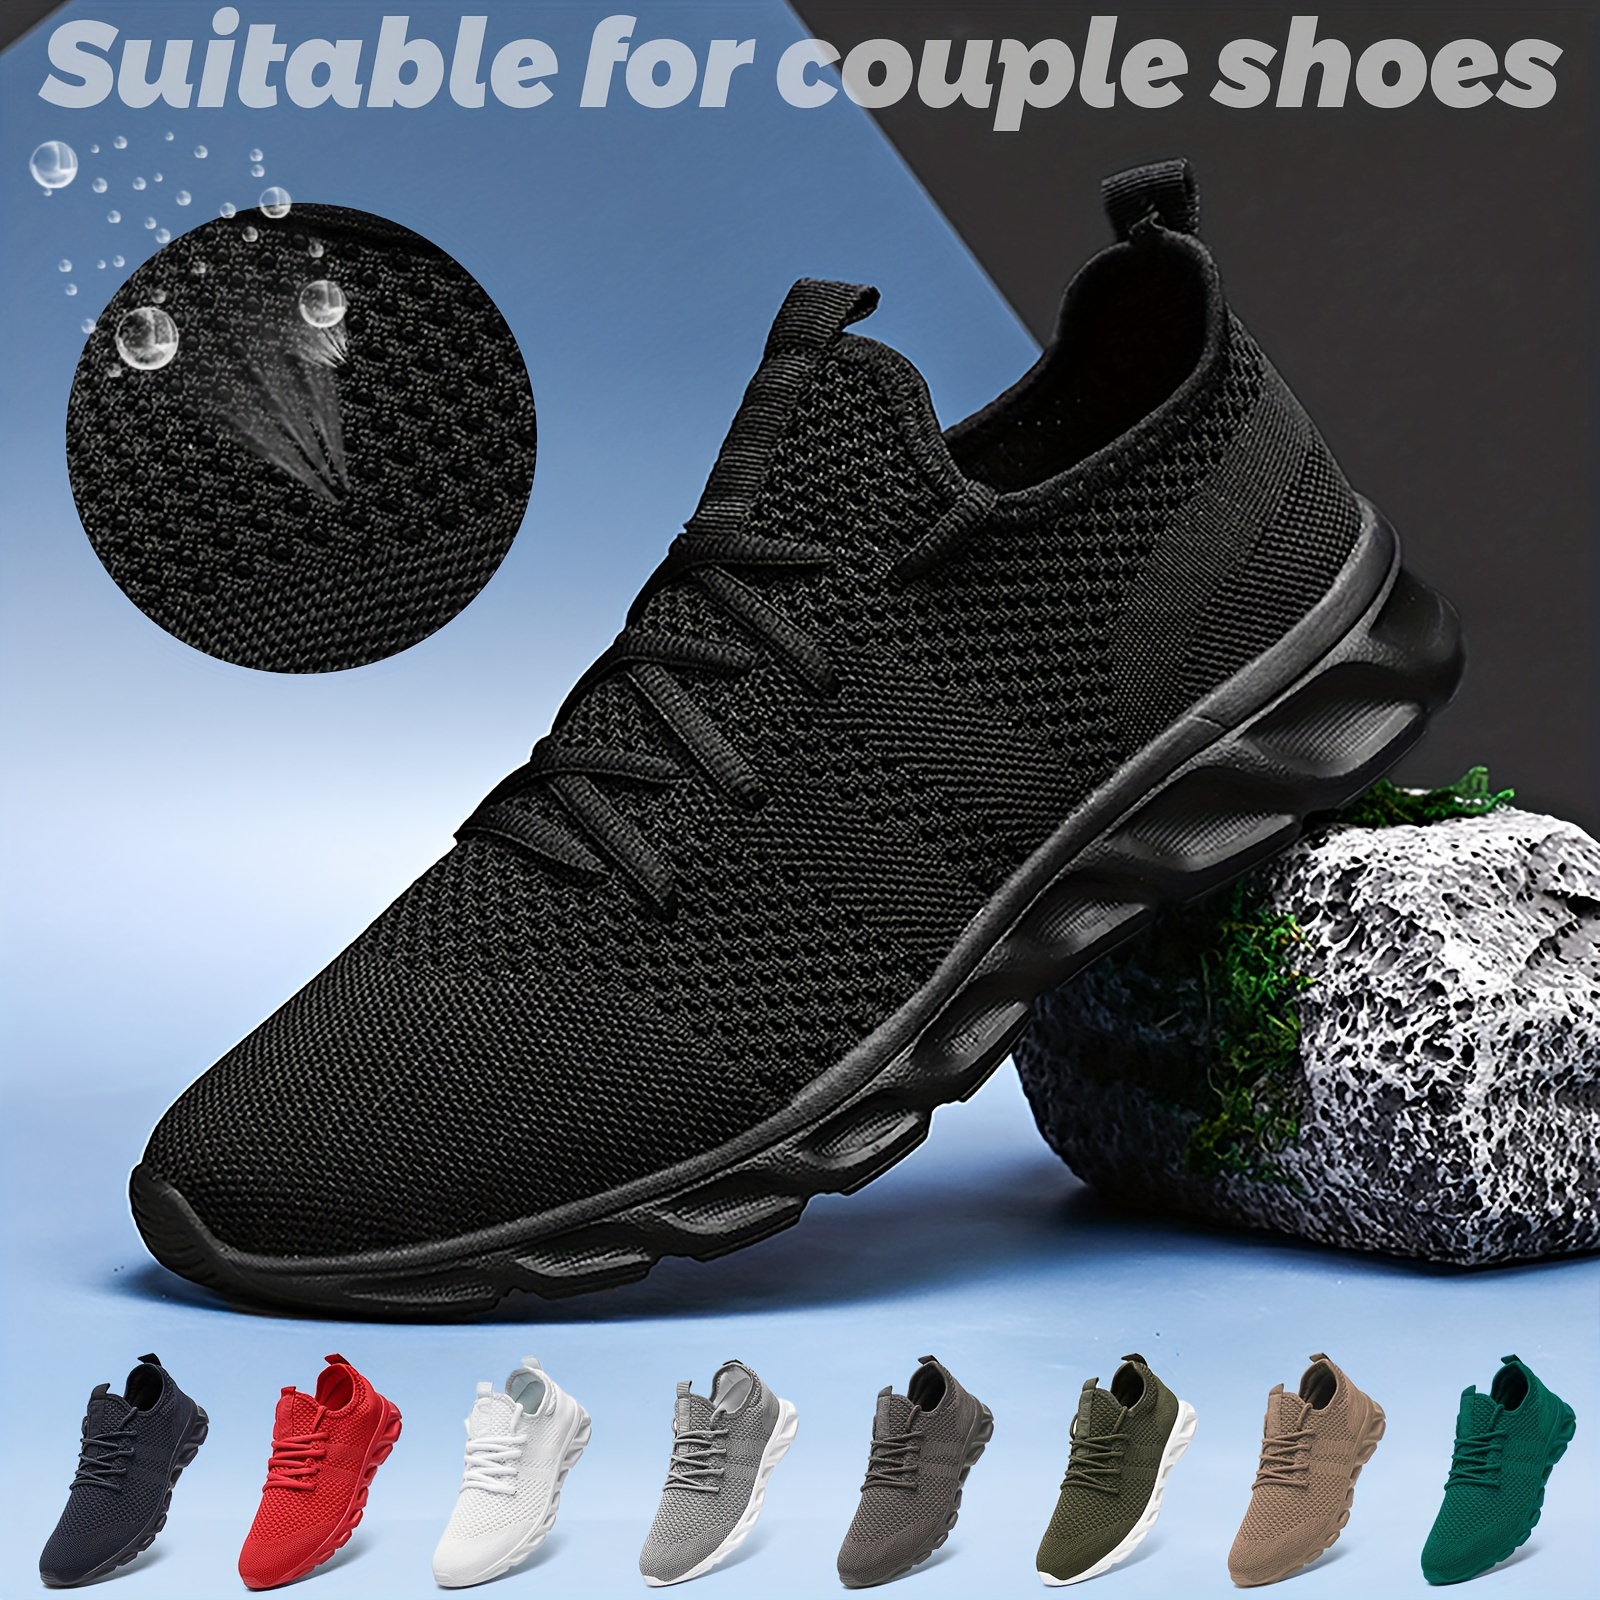 

Men's Running Shoes Couple Knit Breathable Lightweight Running Shoes Outdoor Athletic Walking Sneakers, Spring And Summer